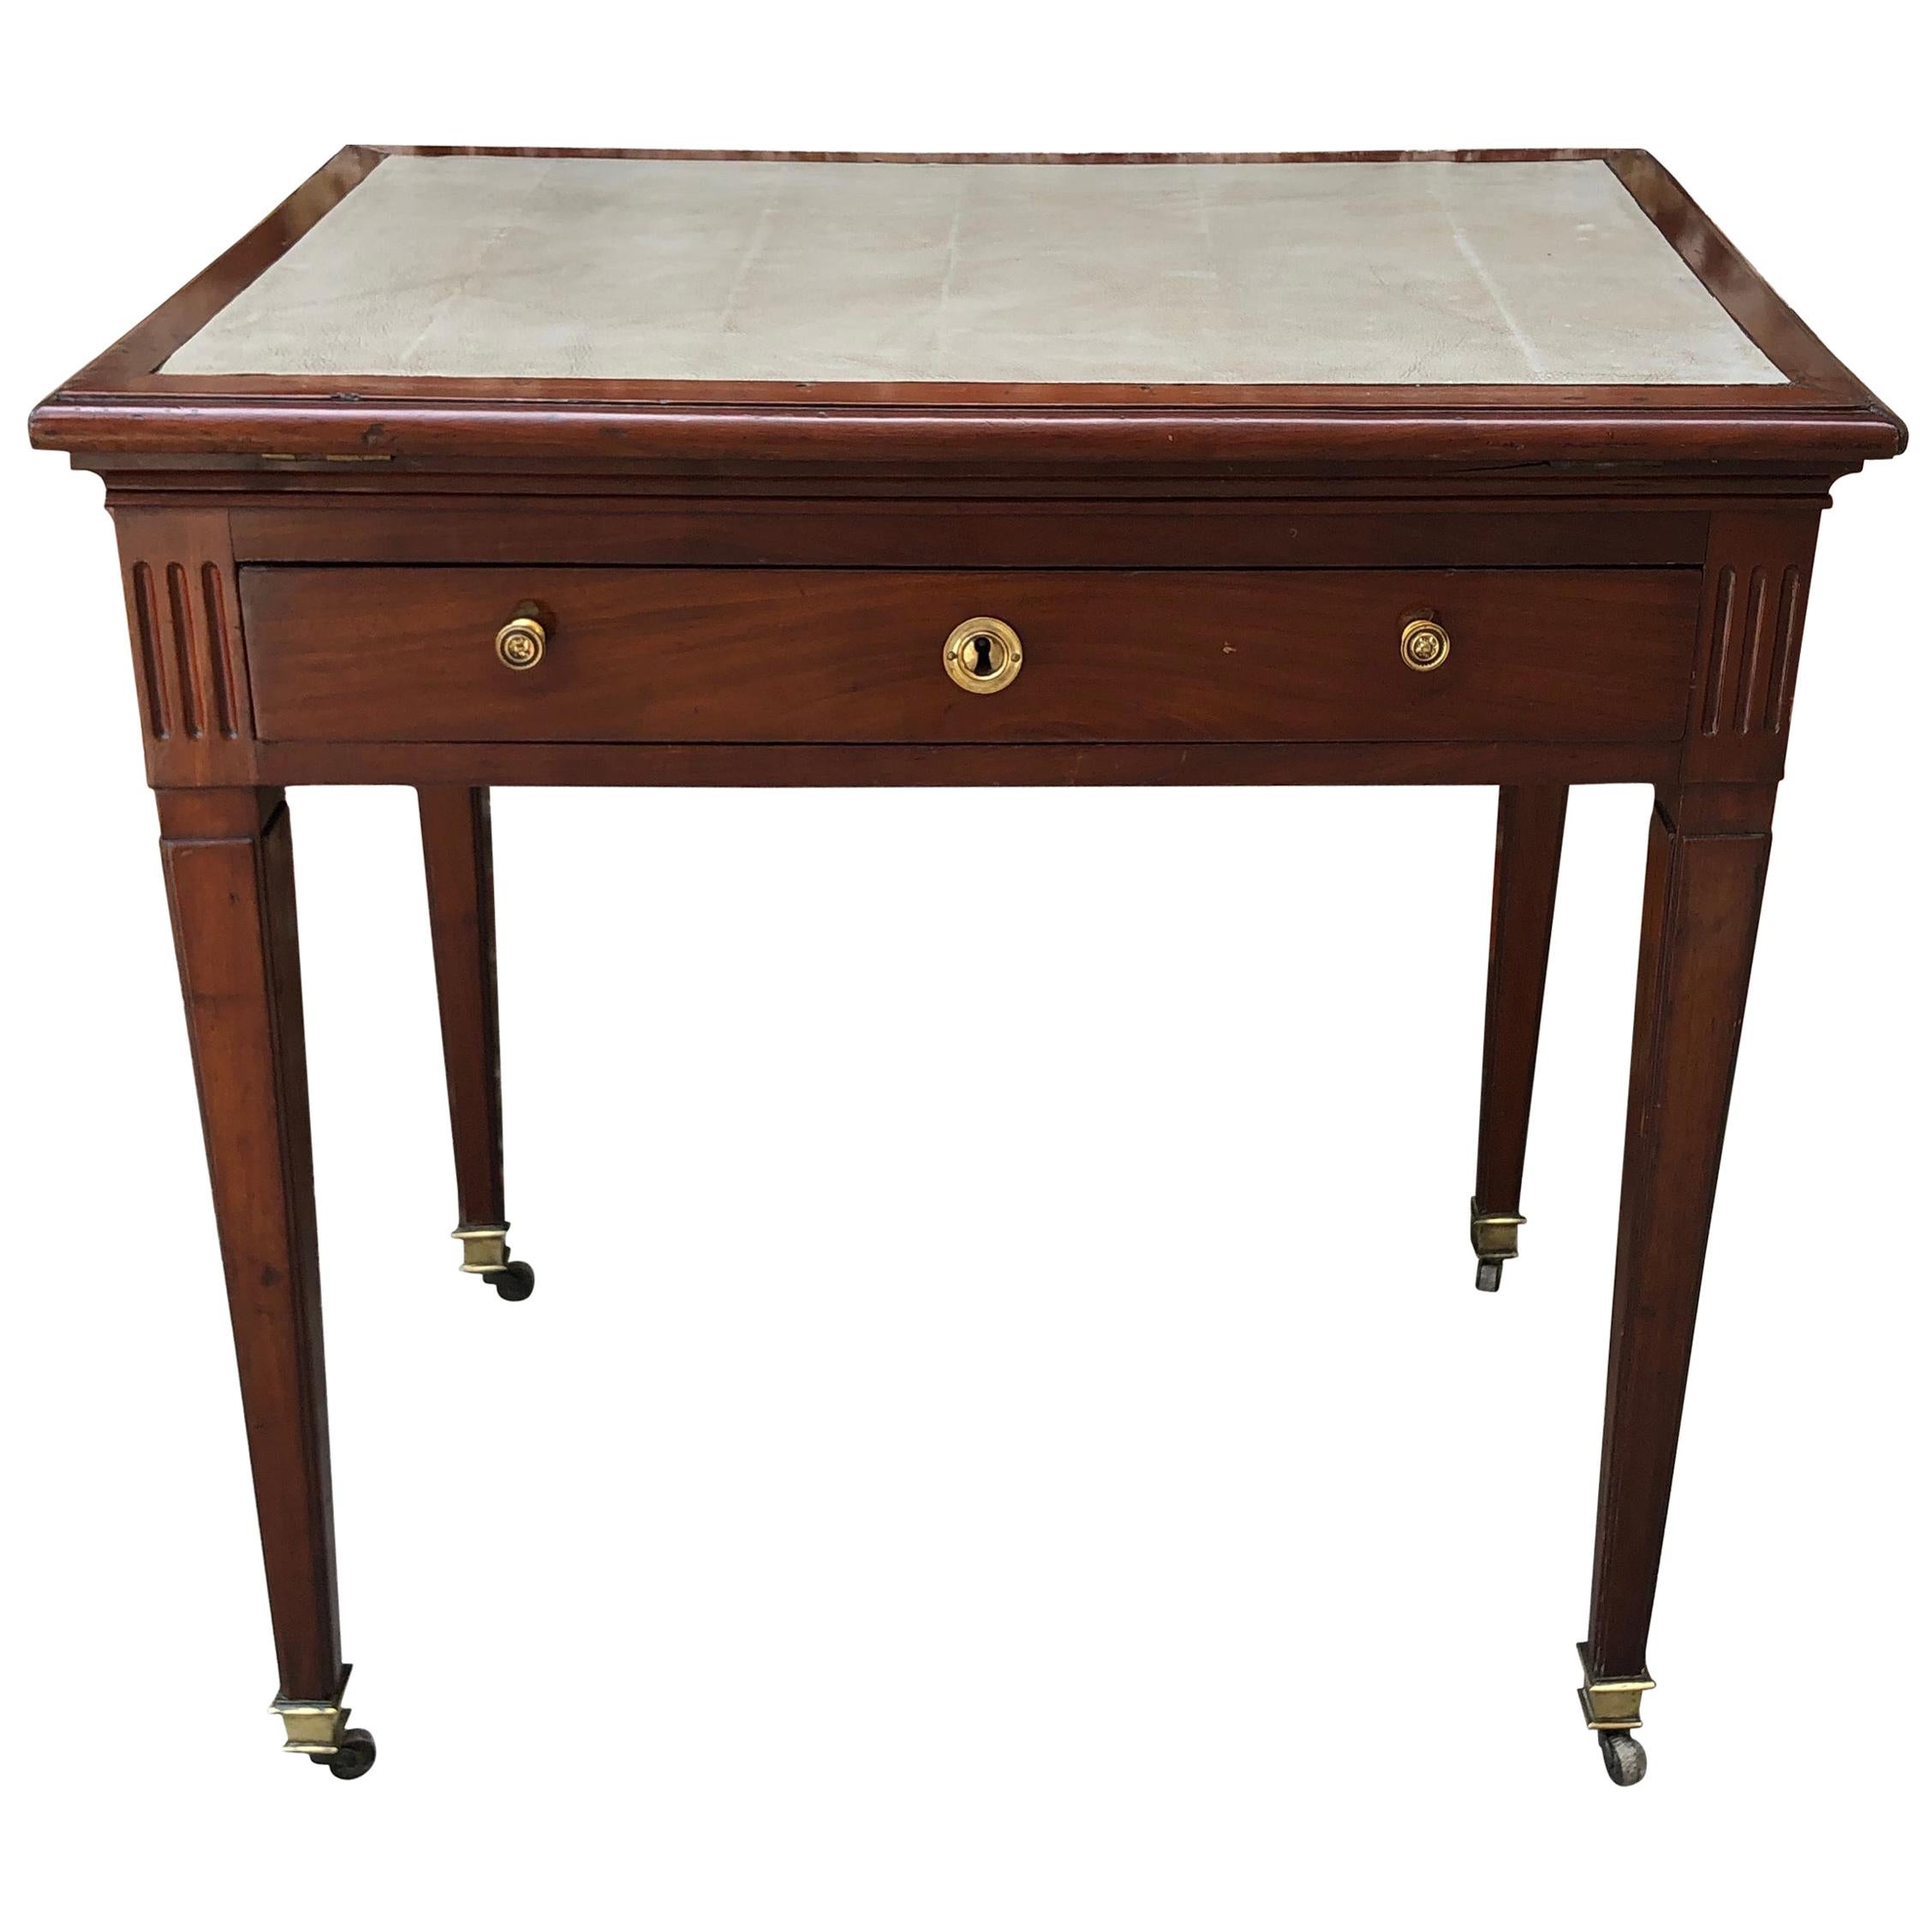 Early 19th Century Mahogany Architects Desk or Drafting Table